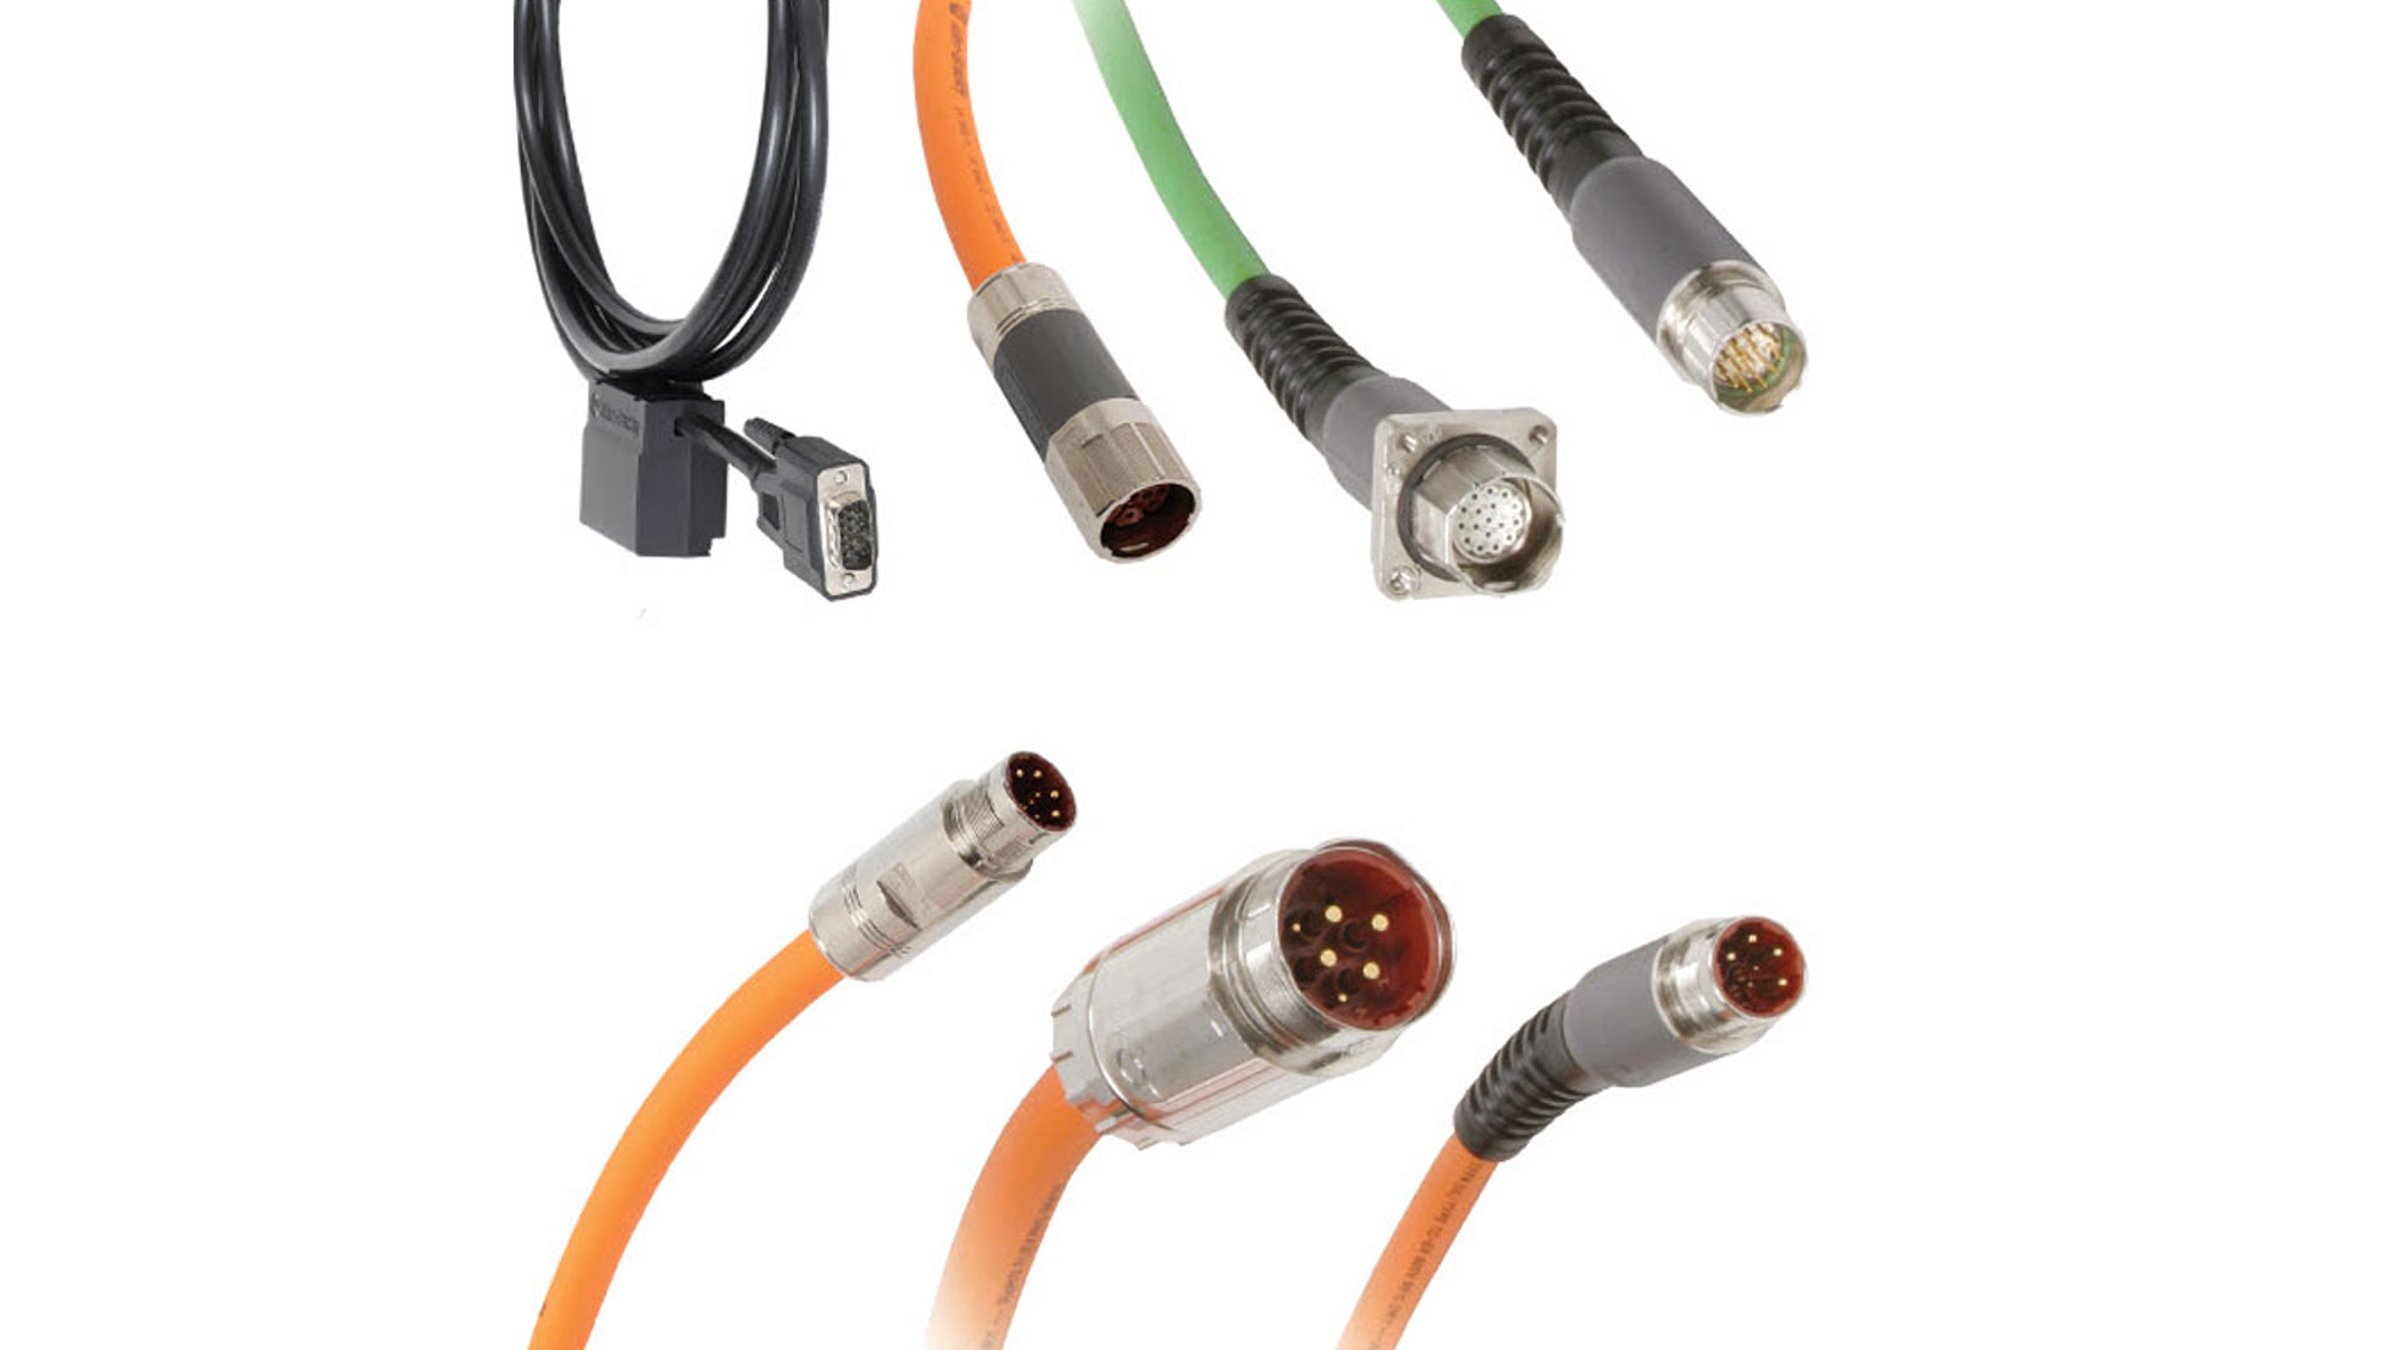 Allen-Bradley Bulletin 2090 Kinetix® Cables are a complete family of standard and continuous flexing cables, equipped with SpeedTEC® DIN connectors for a quick, one-quarter turn connection.